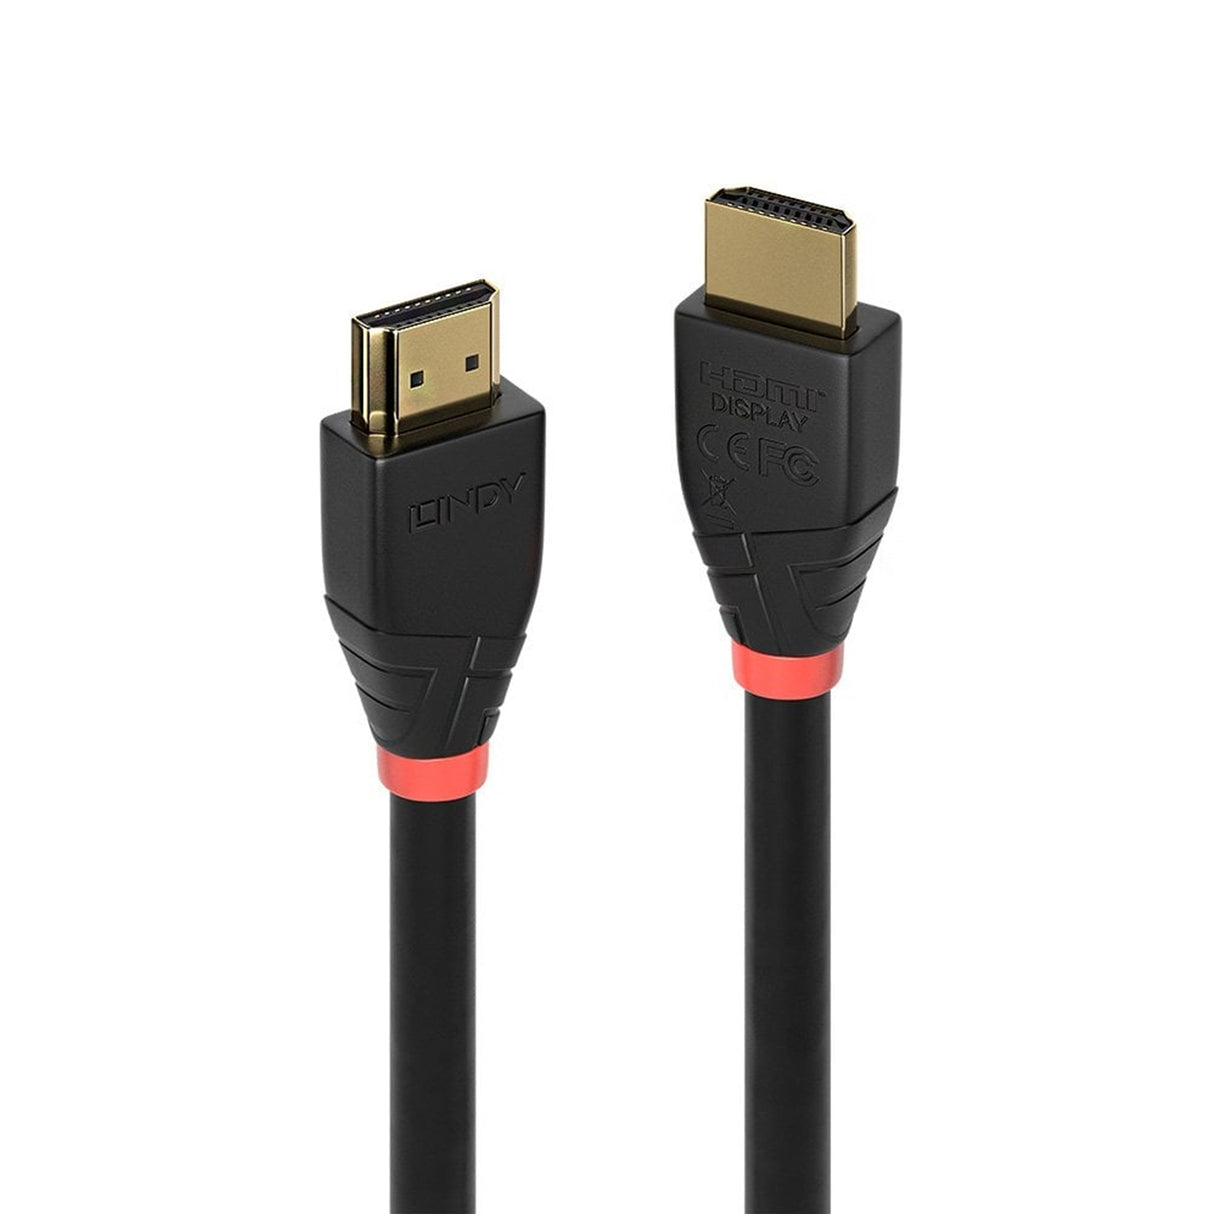 LINDY 41071 10m Active HDMI 18G Cable, Black